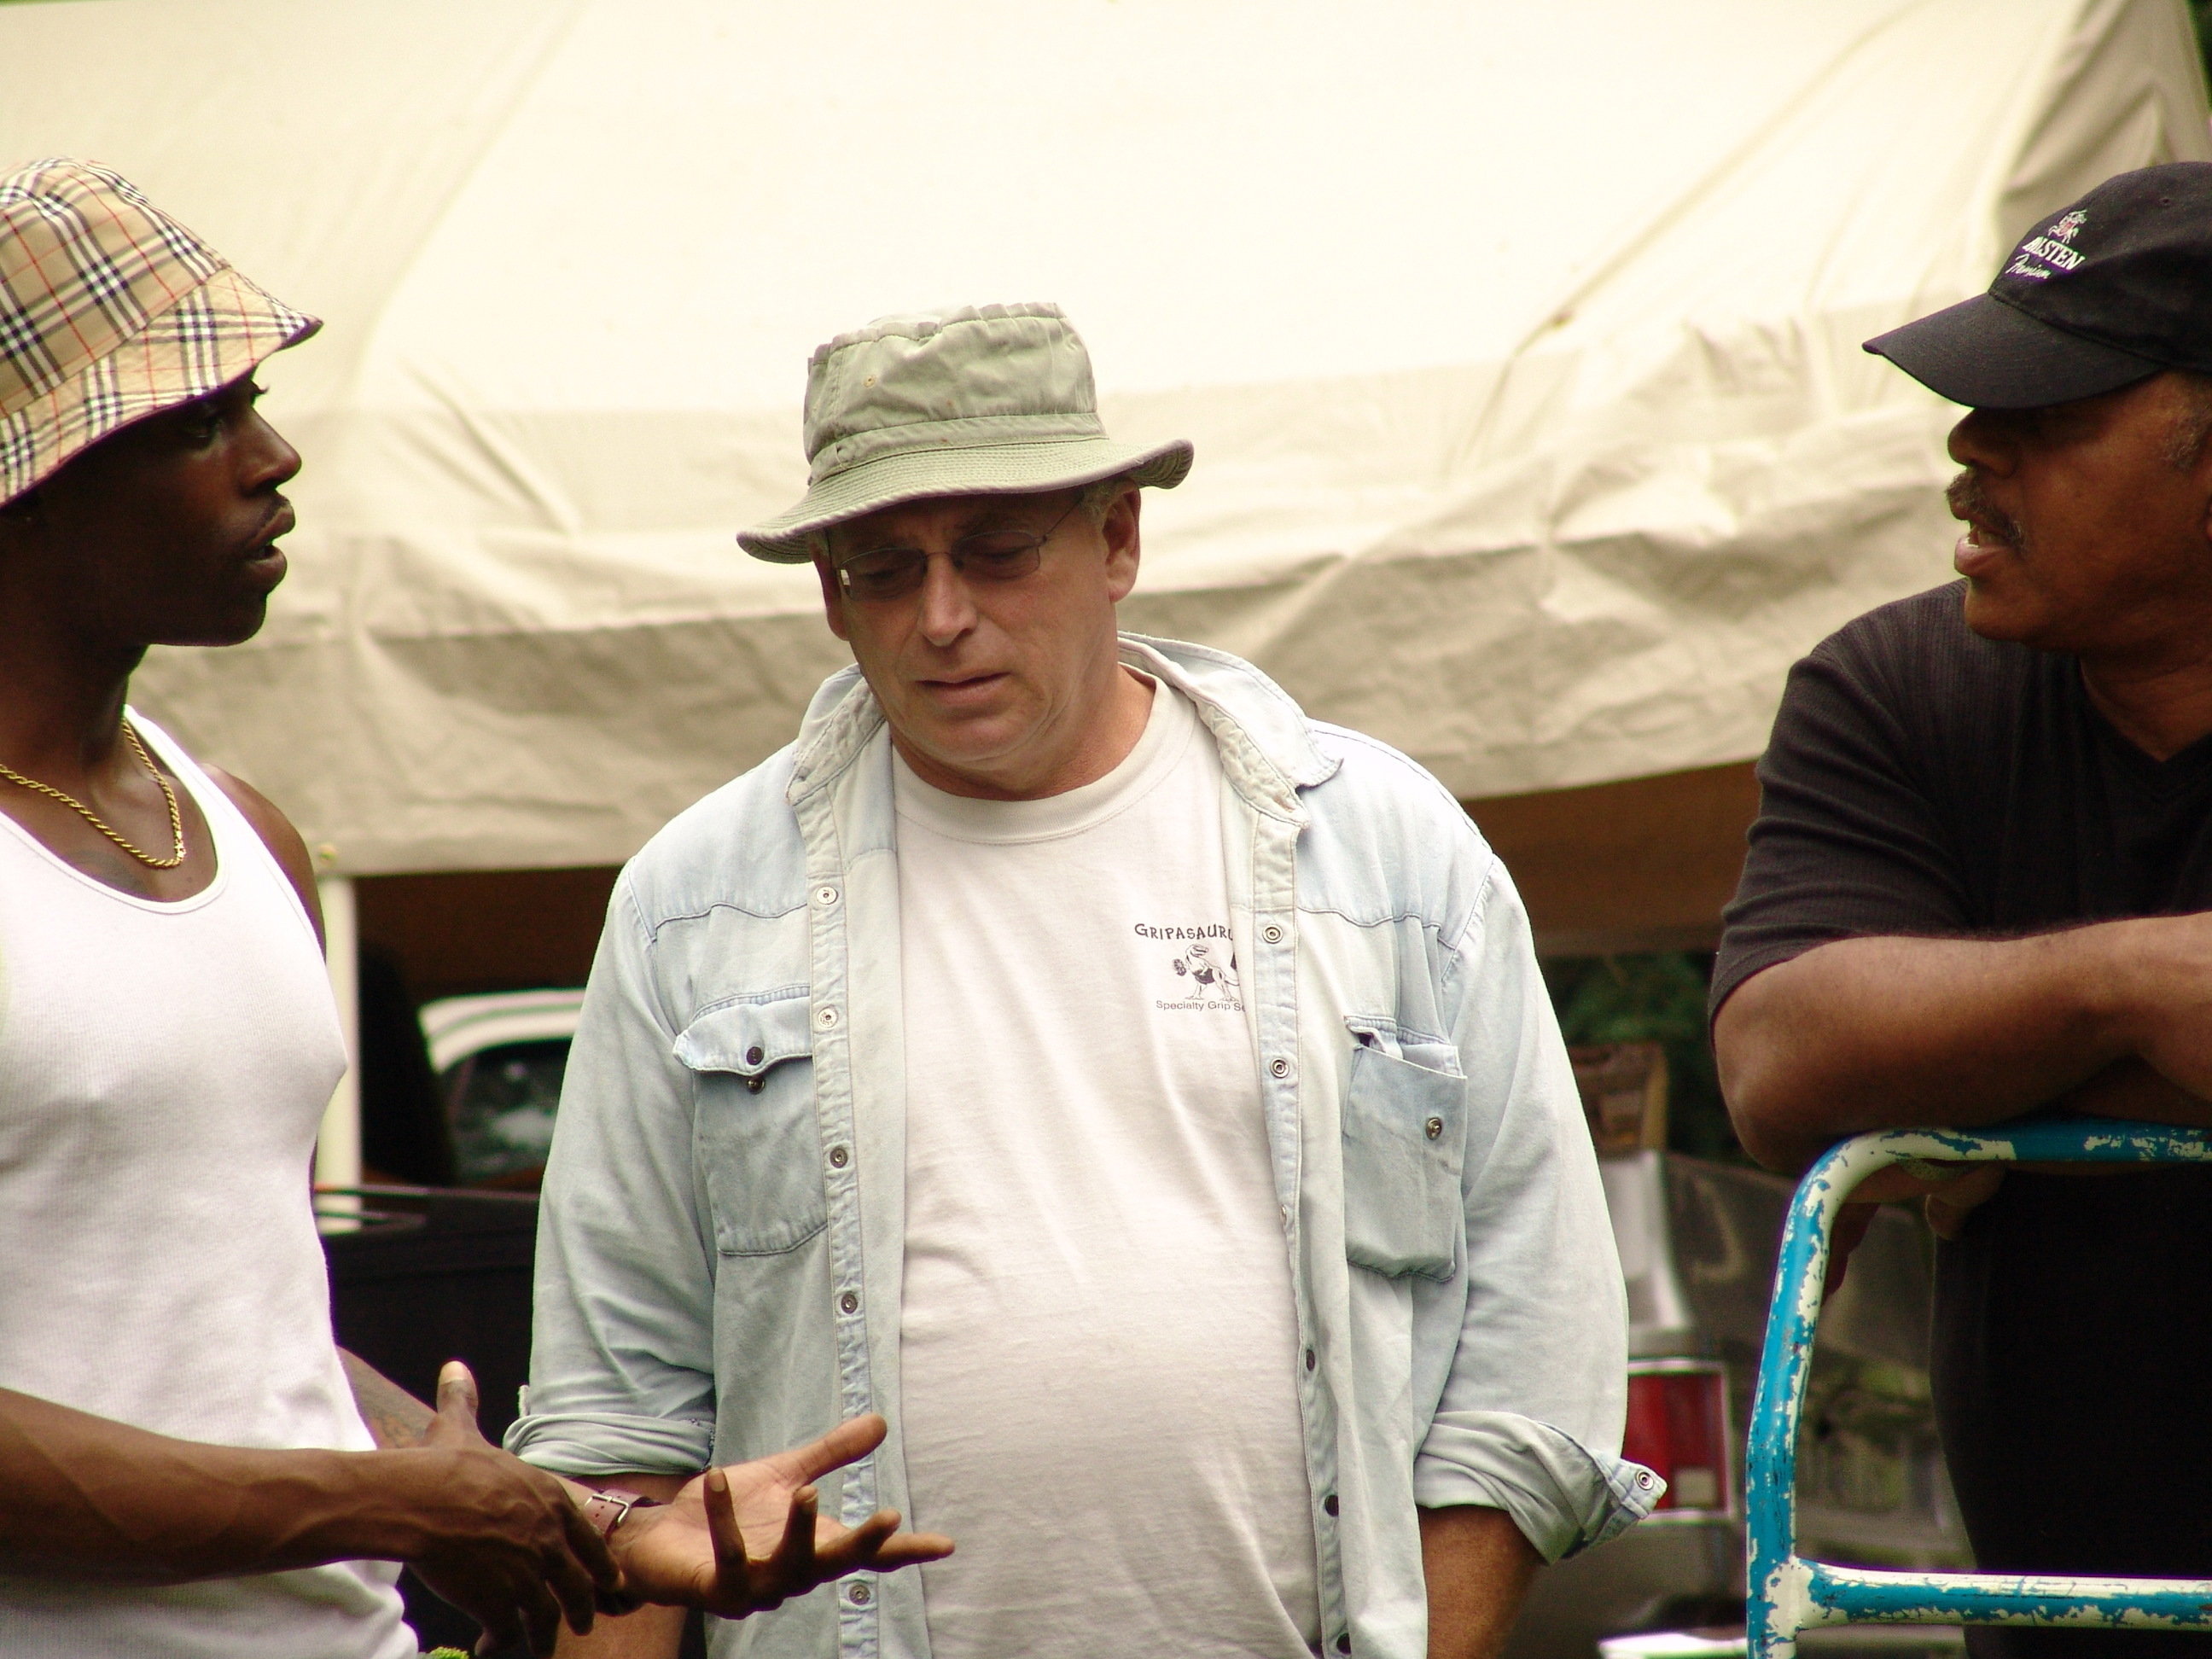 Shane Dean giving direction to Garry Chalk and Nathaniel Deveaux on the set of Under The Sycamore Tree.